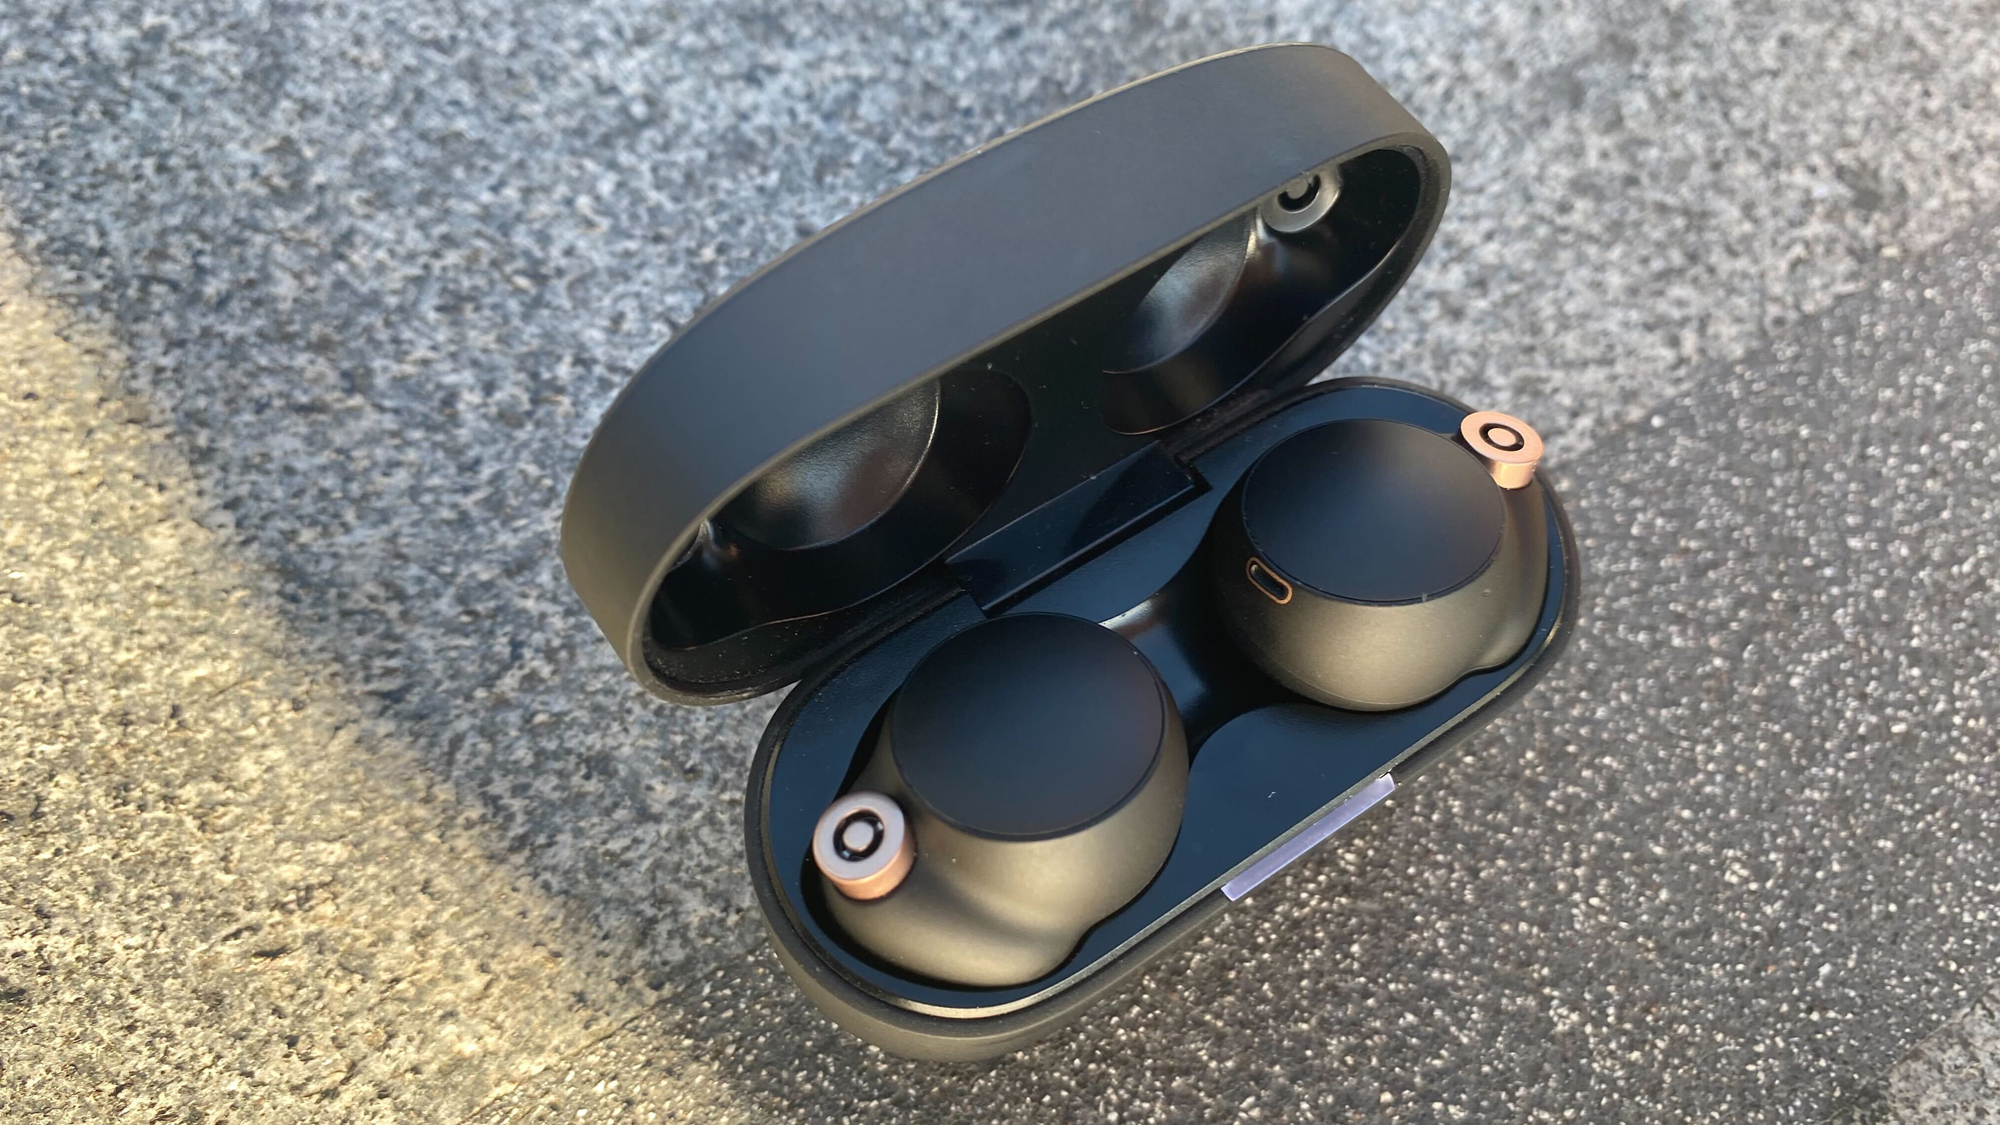 Sony WF-1000XM4 wireless earbuds review (2022): The best noise